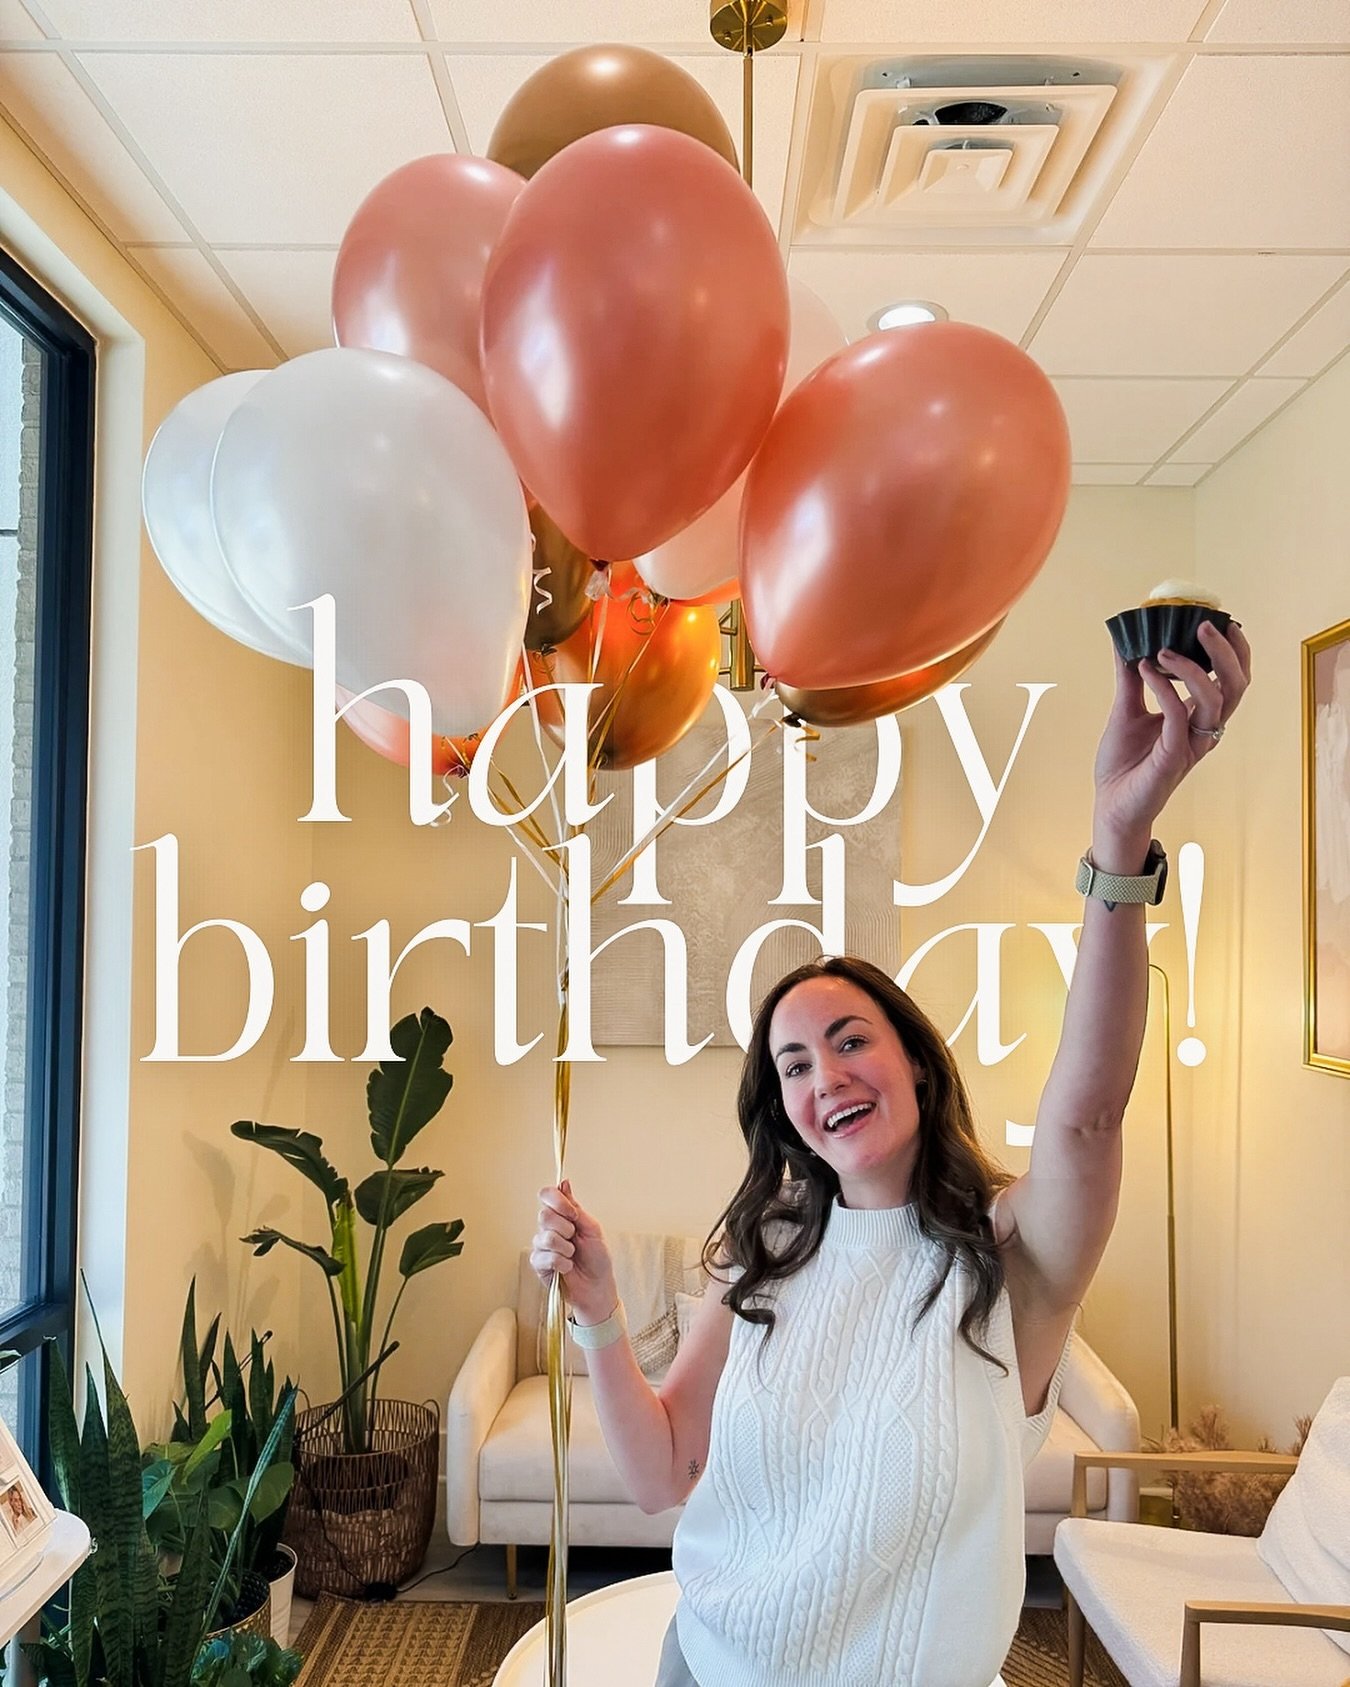 Wishing this fearless leader and nurse practitioner the Happiest of Birthdays today! 🎂

Book a consultation with this queen and you&rsquo;ll see all there is to love about her and learn from her. 🥳

.

👩🏻&zwj;⚕️Sara Courtney, DNP, FNP-BC
(@Saraco